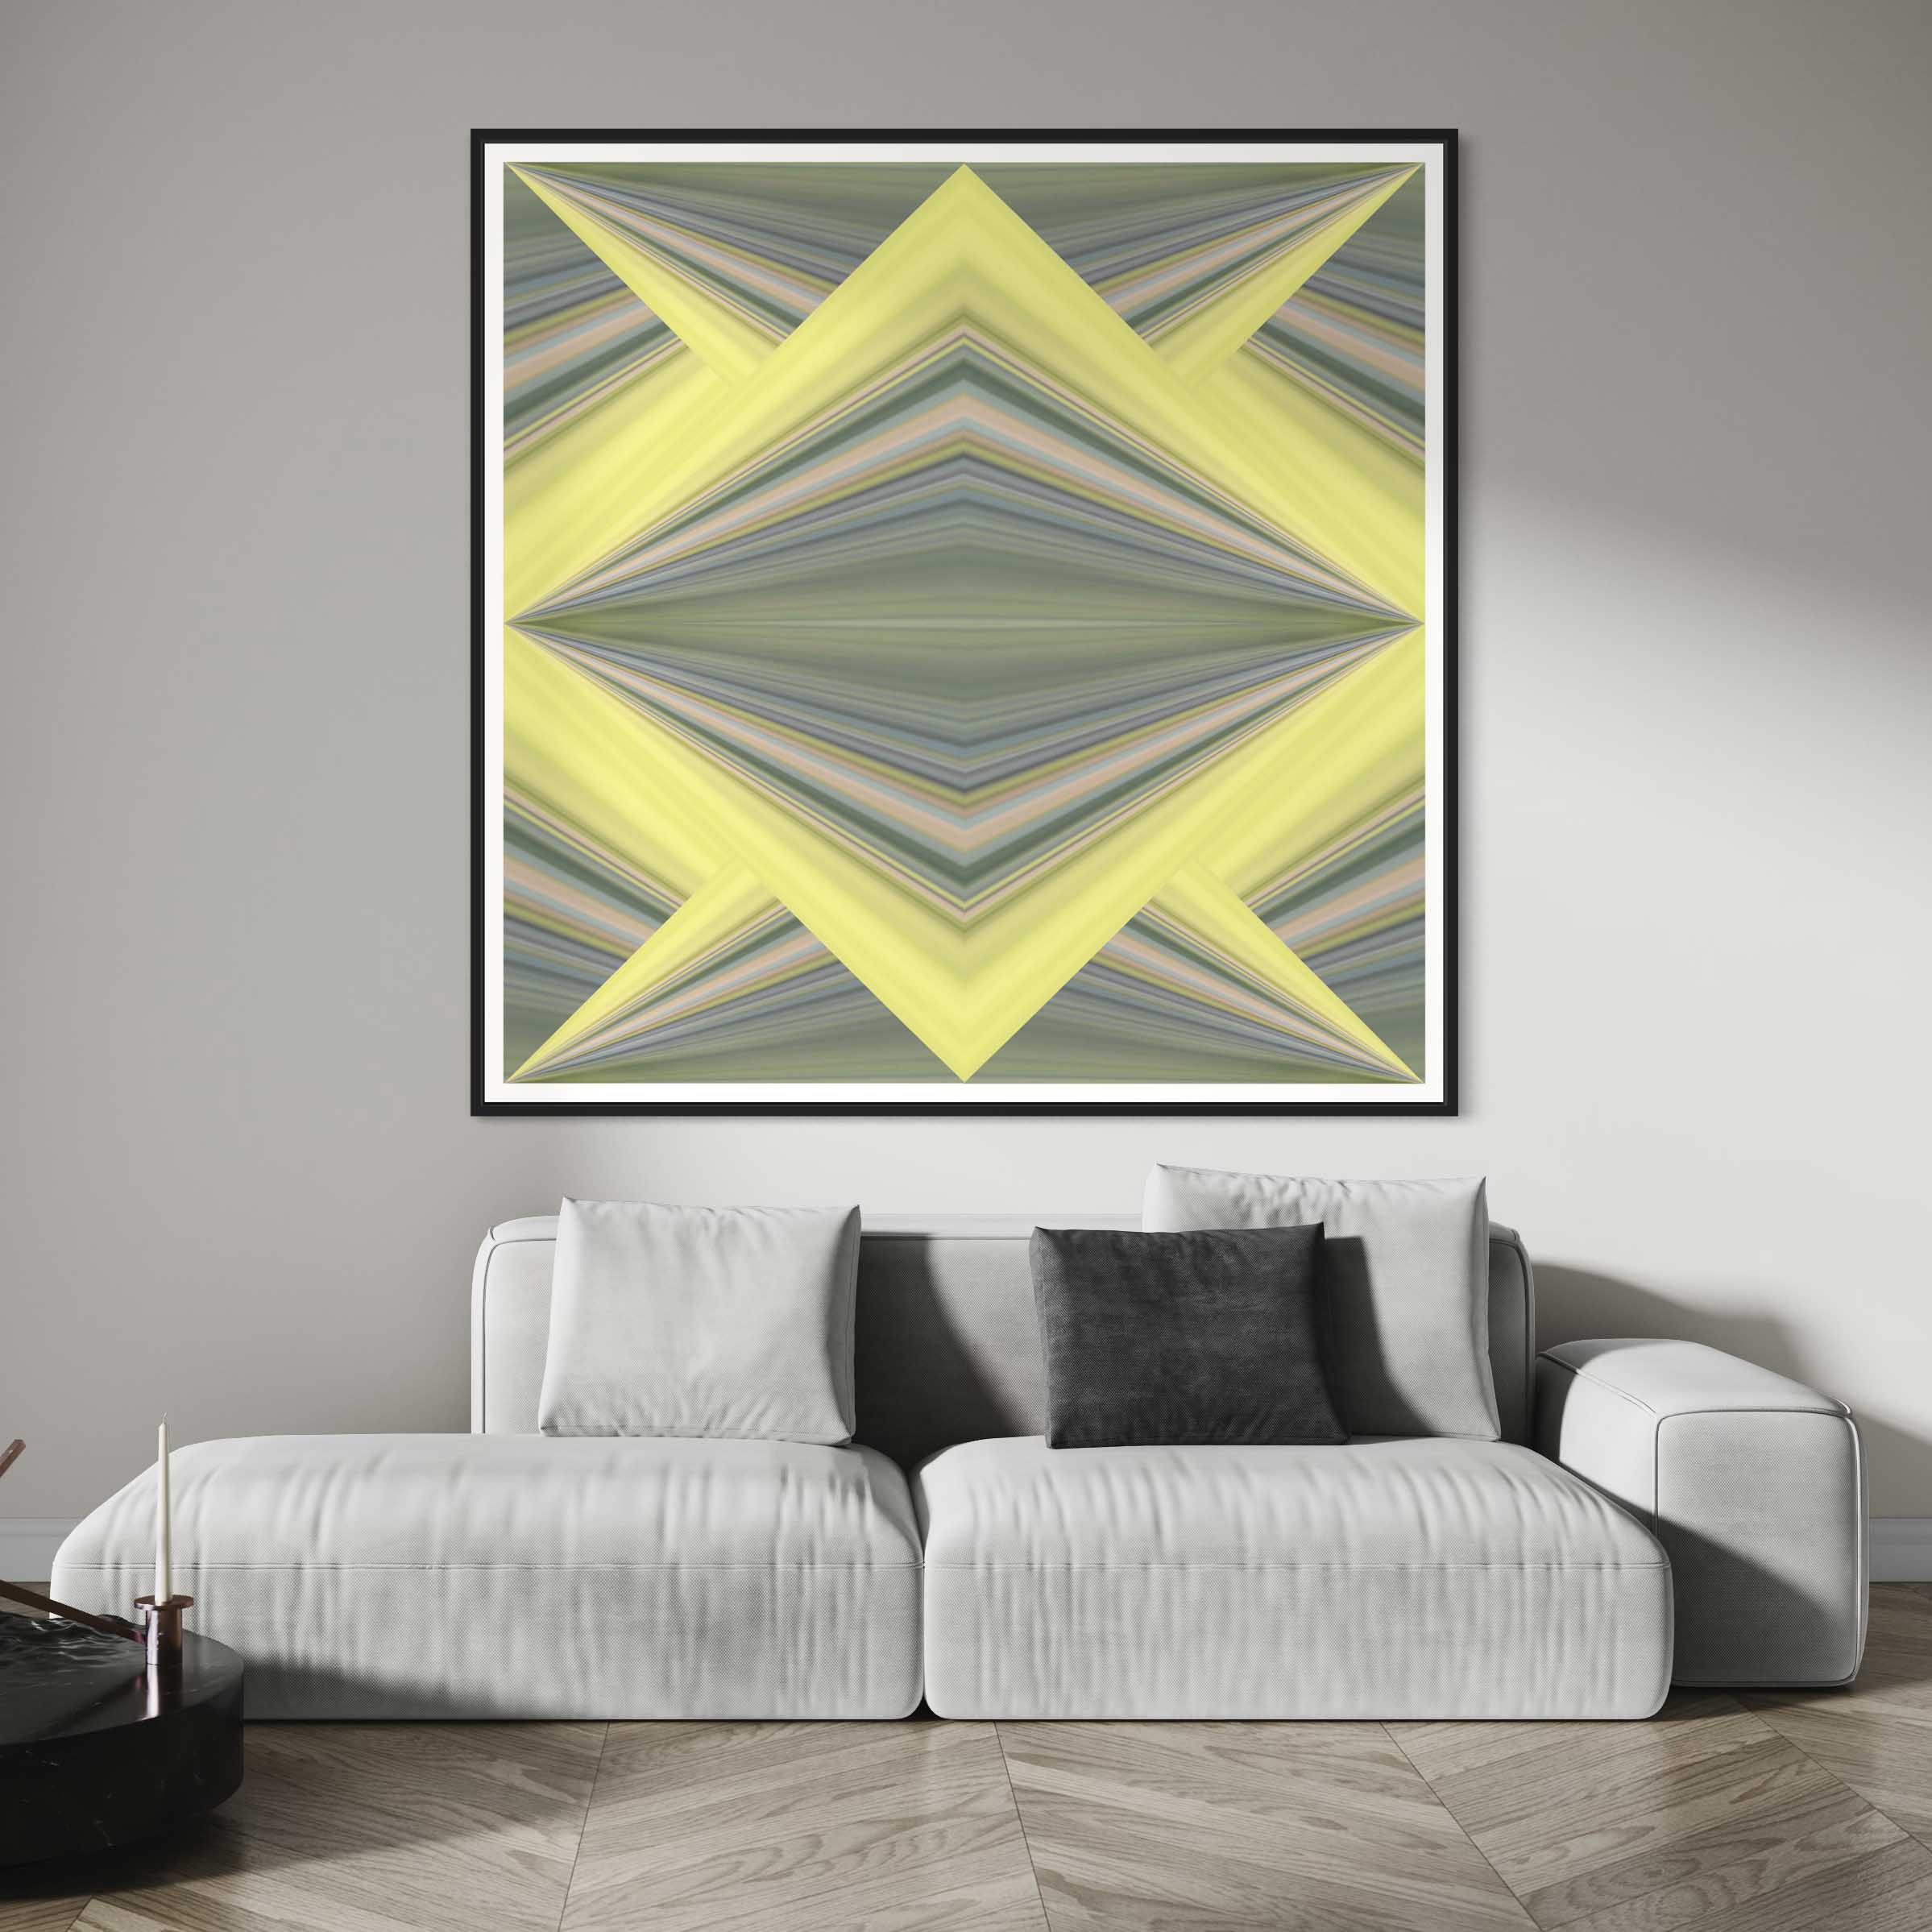 A large painting of yellow and gray colors in the middle of a living room.